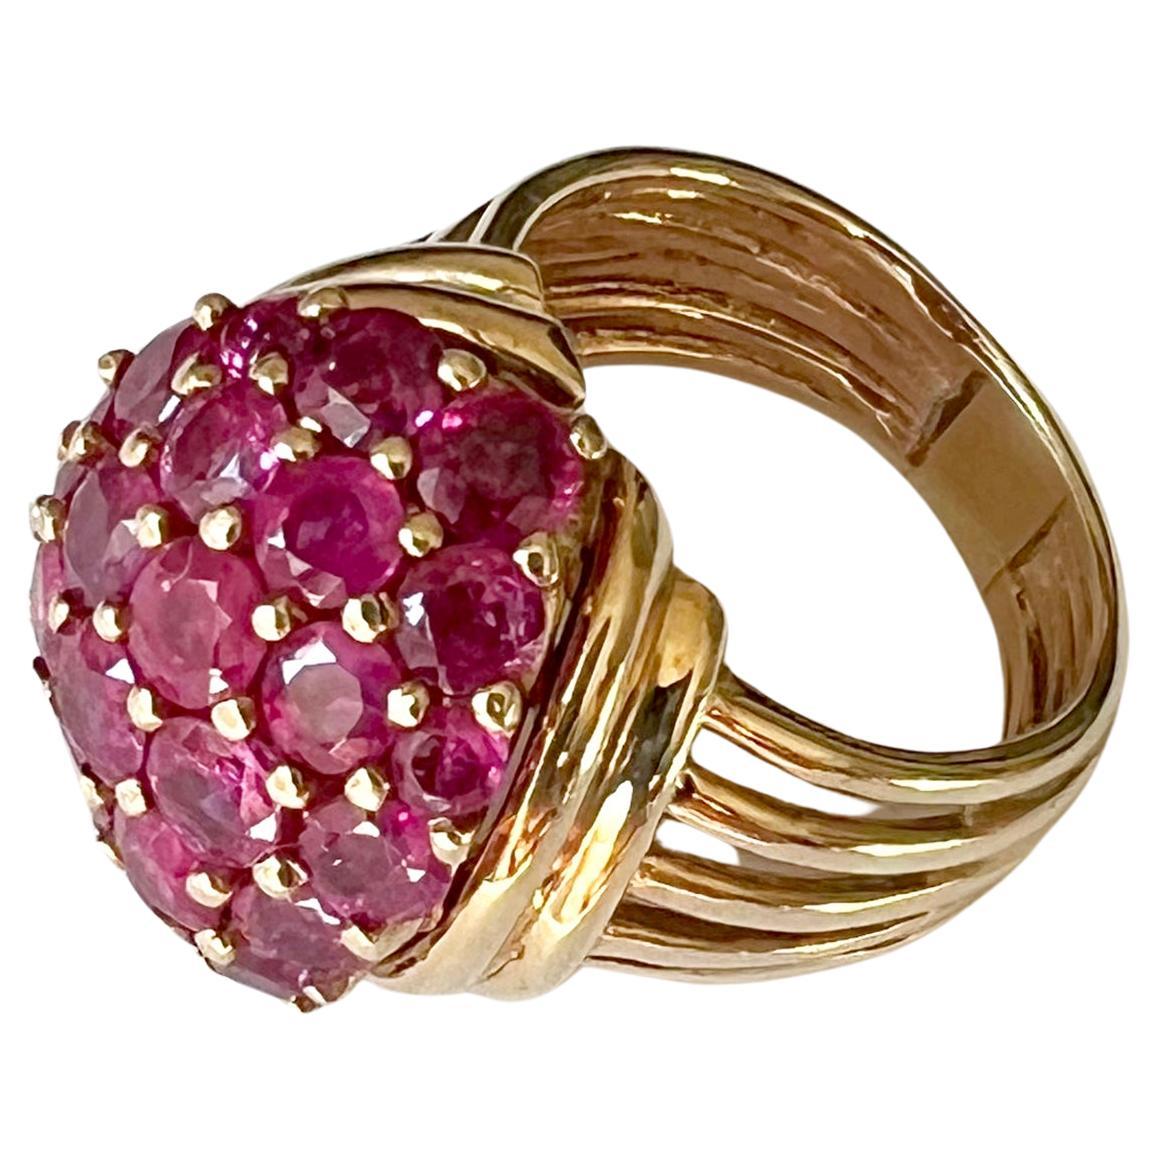 1960s 14K Gold and Pave Rubies Bombe Cocktail Ring For Sale 1